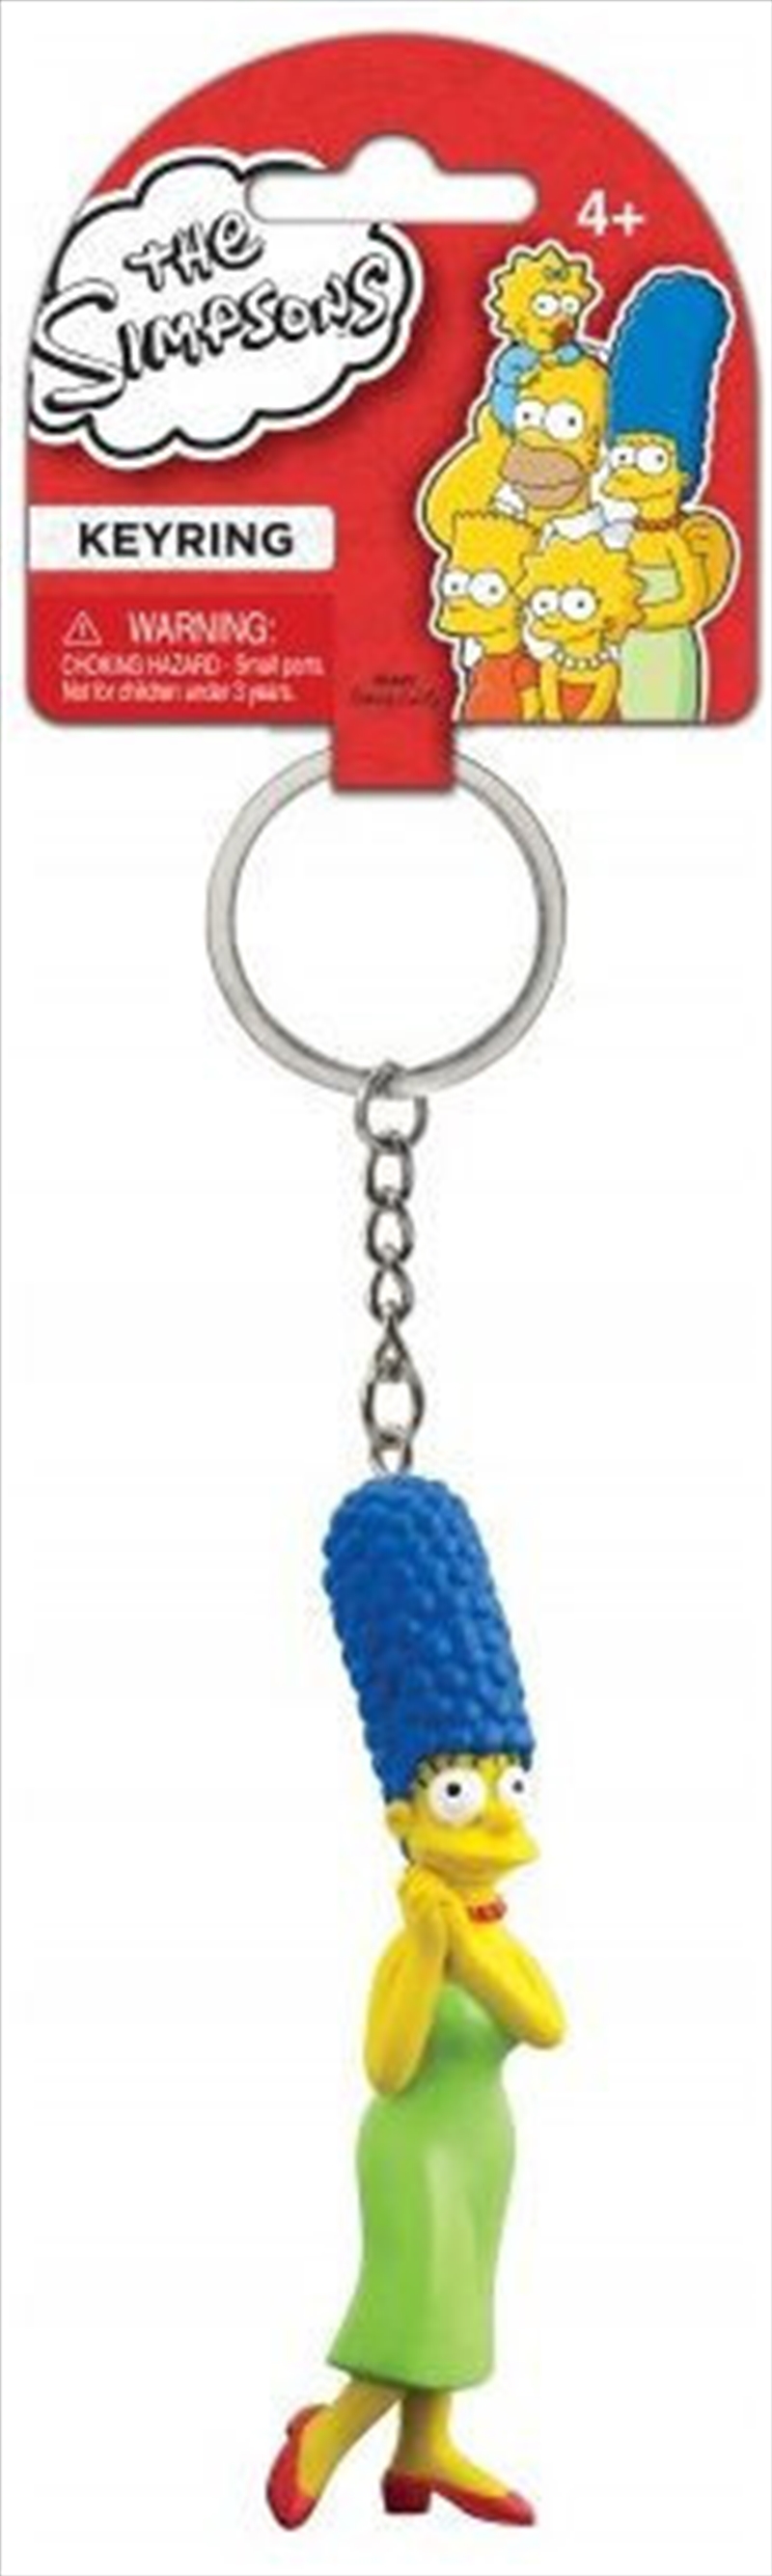 Keyring PVC Figural The Simpsons Marge Simpson/Product Detail/Keyrings